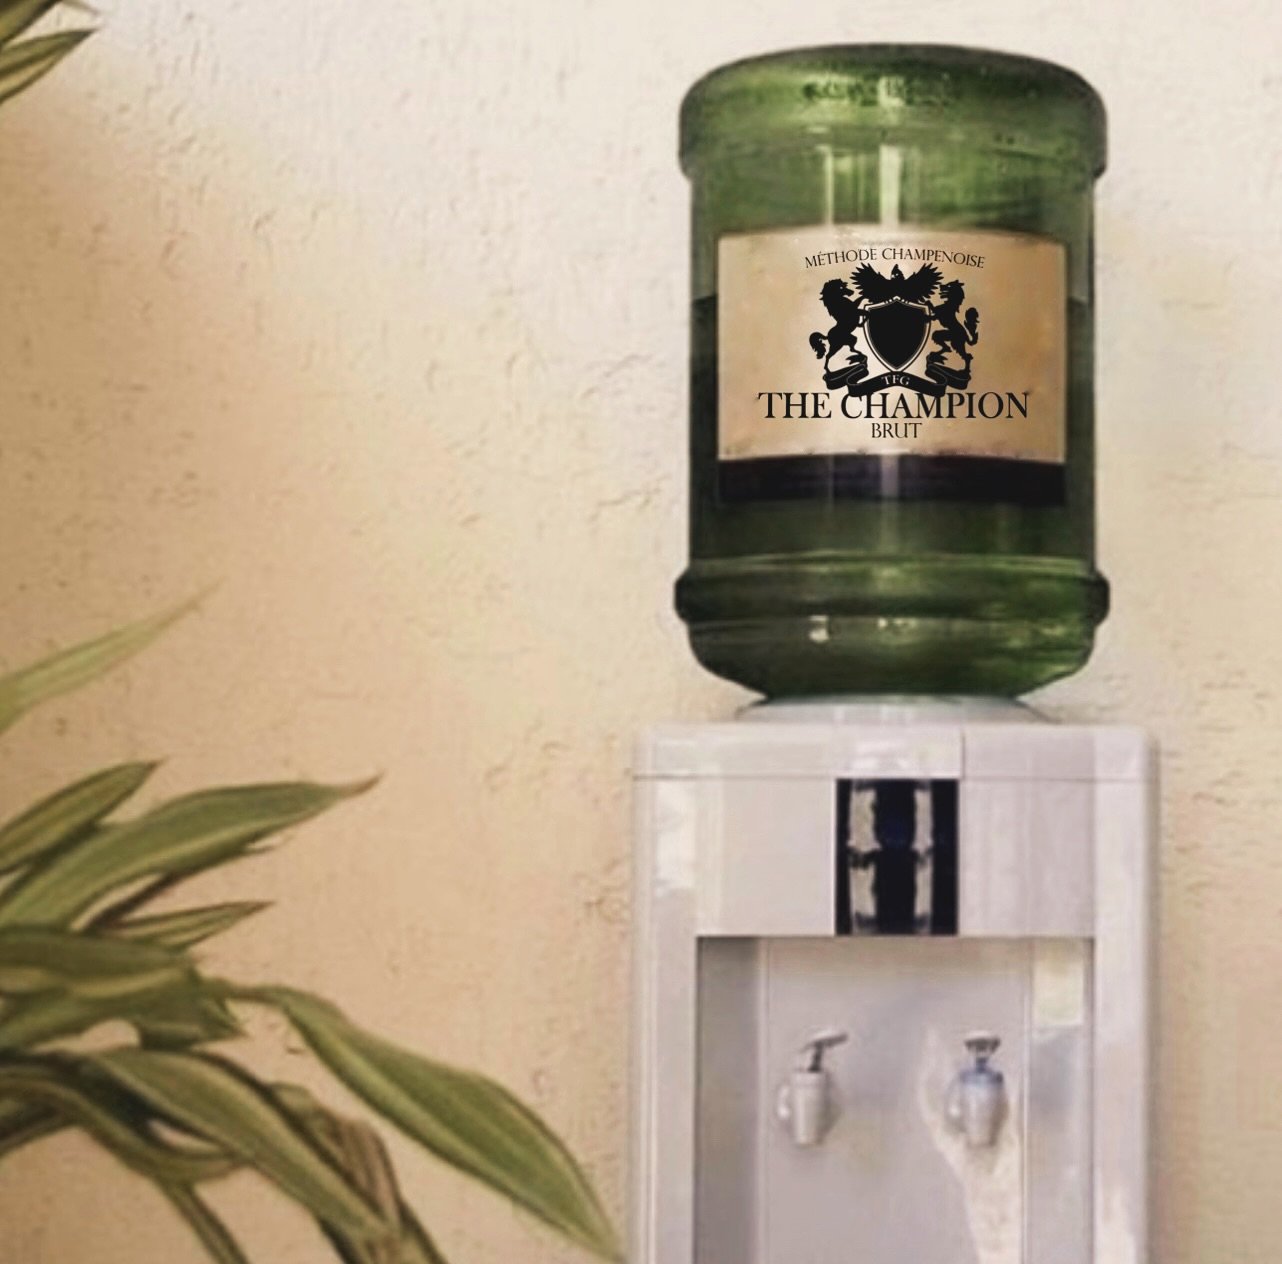 The best Mother&rsquo;s Day present? Unlimited Champion Brut bubbles from Three Fat Guys at the press of a button! 🍾 #BestGiftEver
.
#threefatguyswines #sonoma #winery #winelovers #winelover #champagne #champagnelover #champagnelife #mothersdaygift